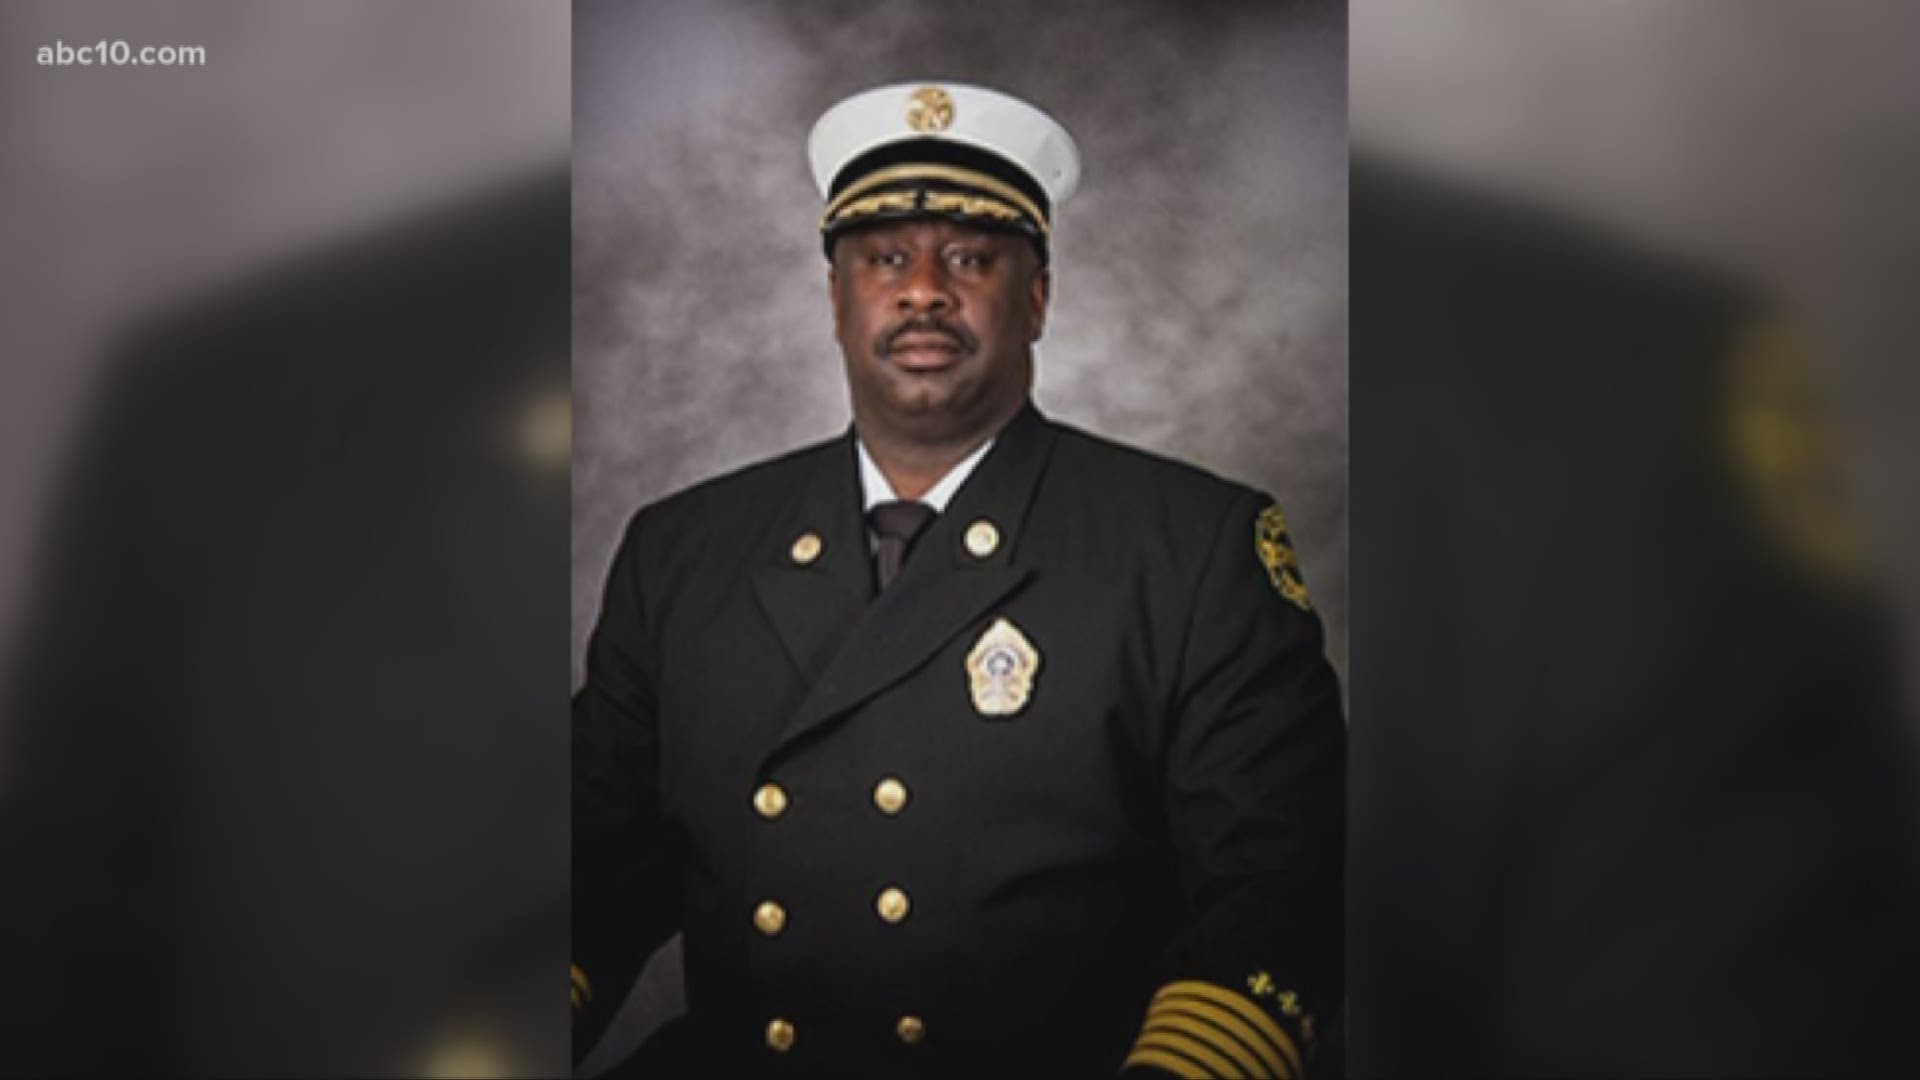 Stockton Fire Chief Erik Newman was arrested Thursday on charges of felony domestic violence. He is out on bail and remains on administrative leave.